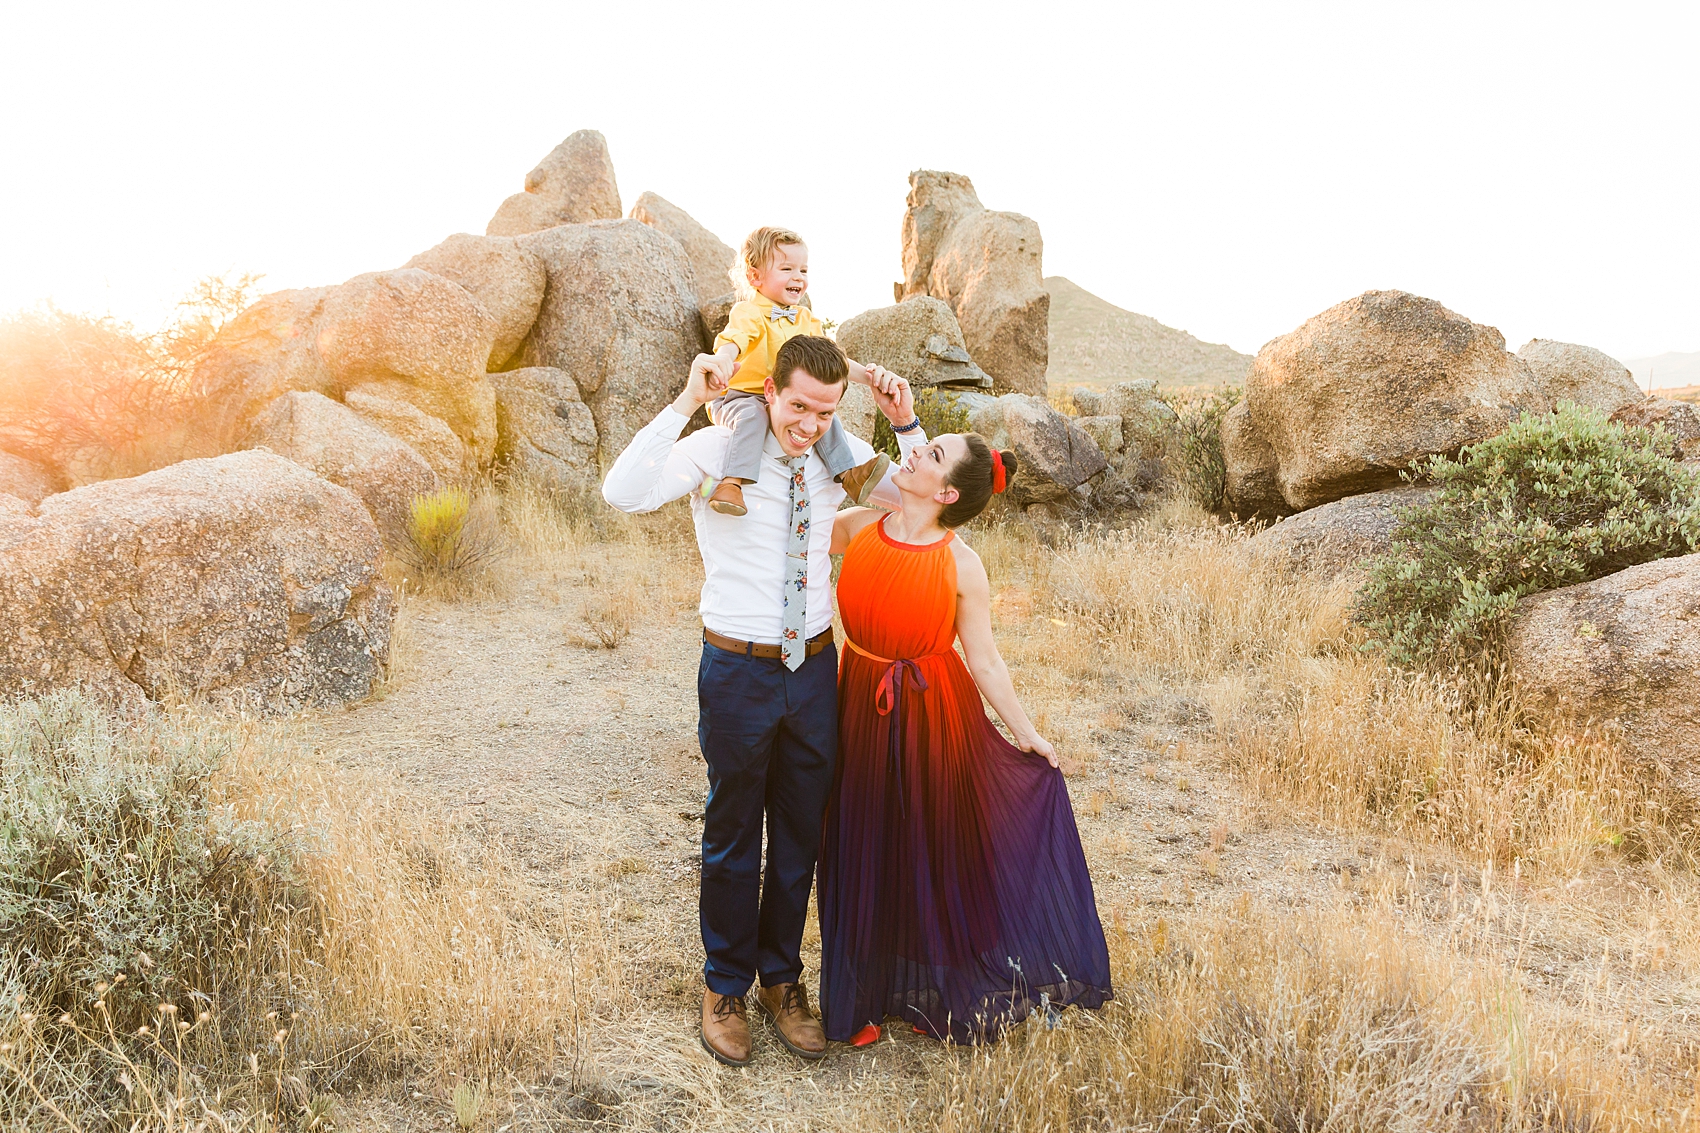 Leah Hope Photography | Scottsdale Phoenix Arizona Family Photos | Desert Landscape Cactus Scenery Boulders | Family Pictures | What to Wear | Family Posing Poses | Scottsdale Photographer | Family Child Photographer | Outfits and Styling | Sunset Colors Bold Dress